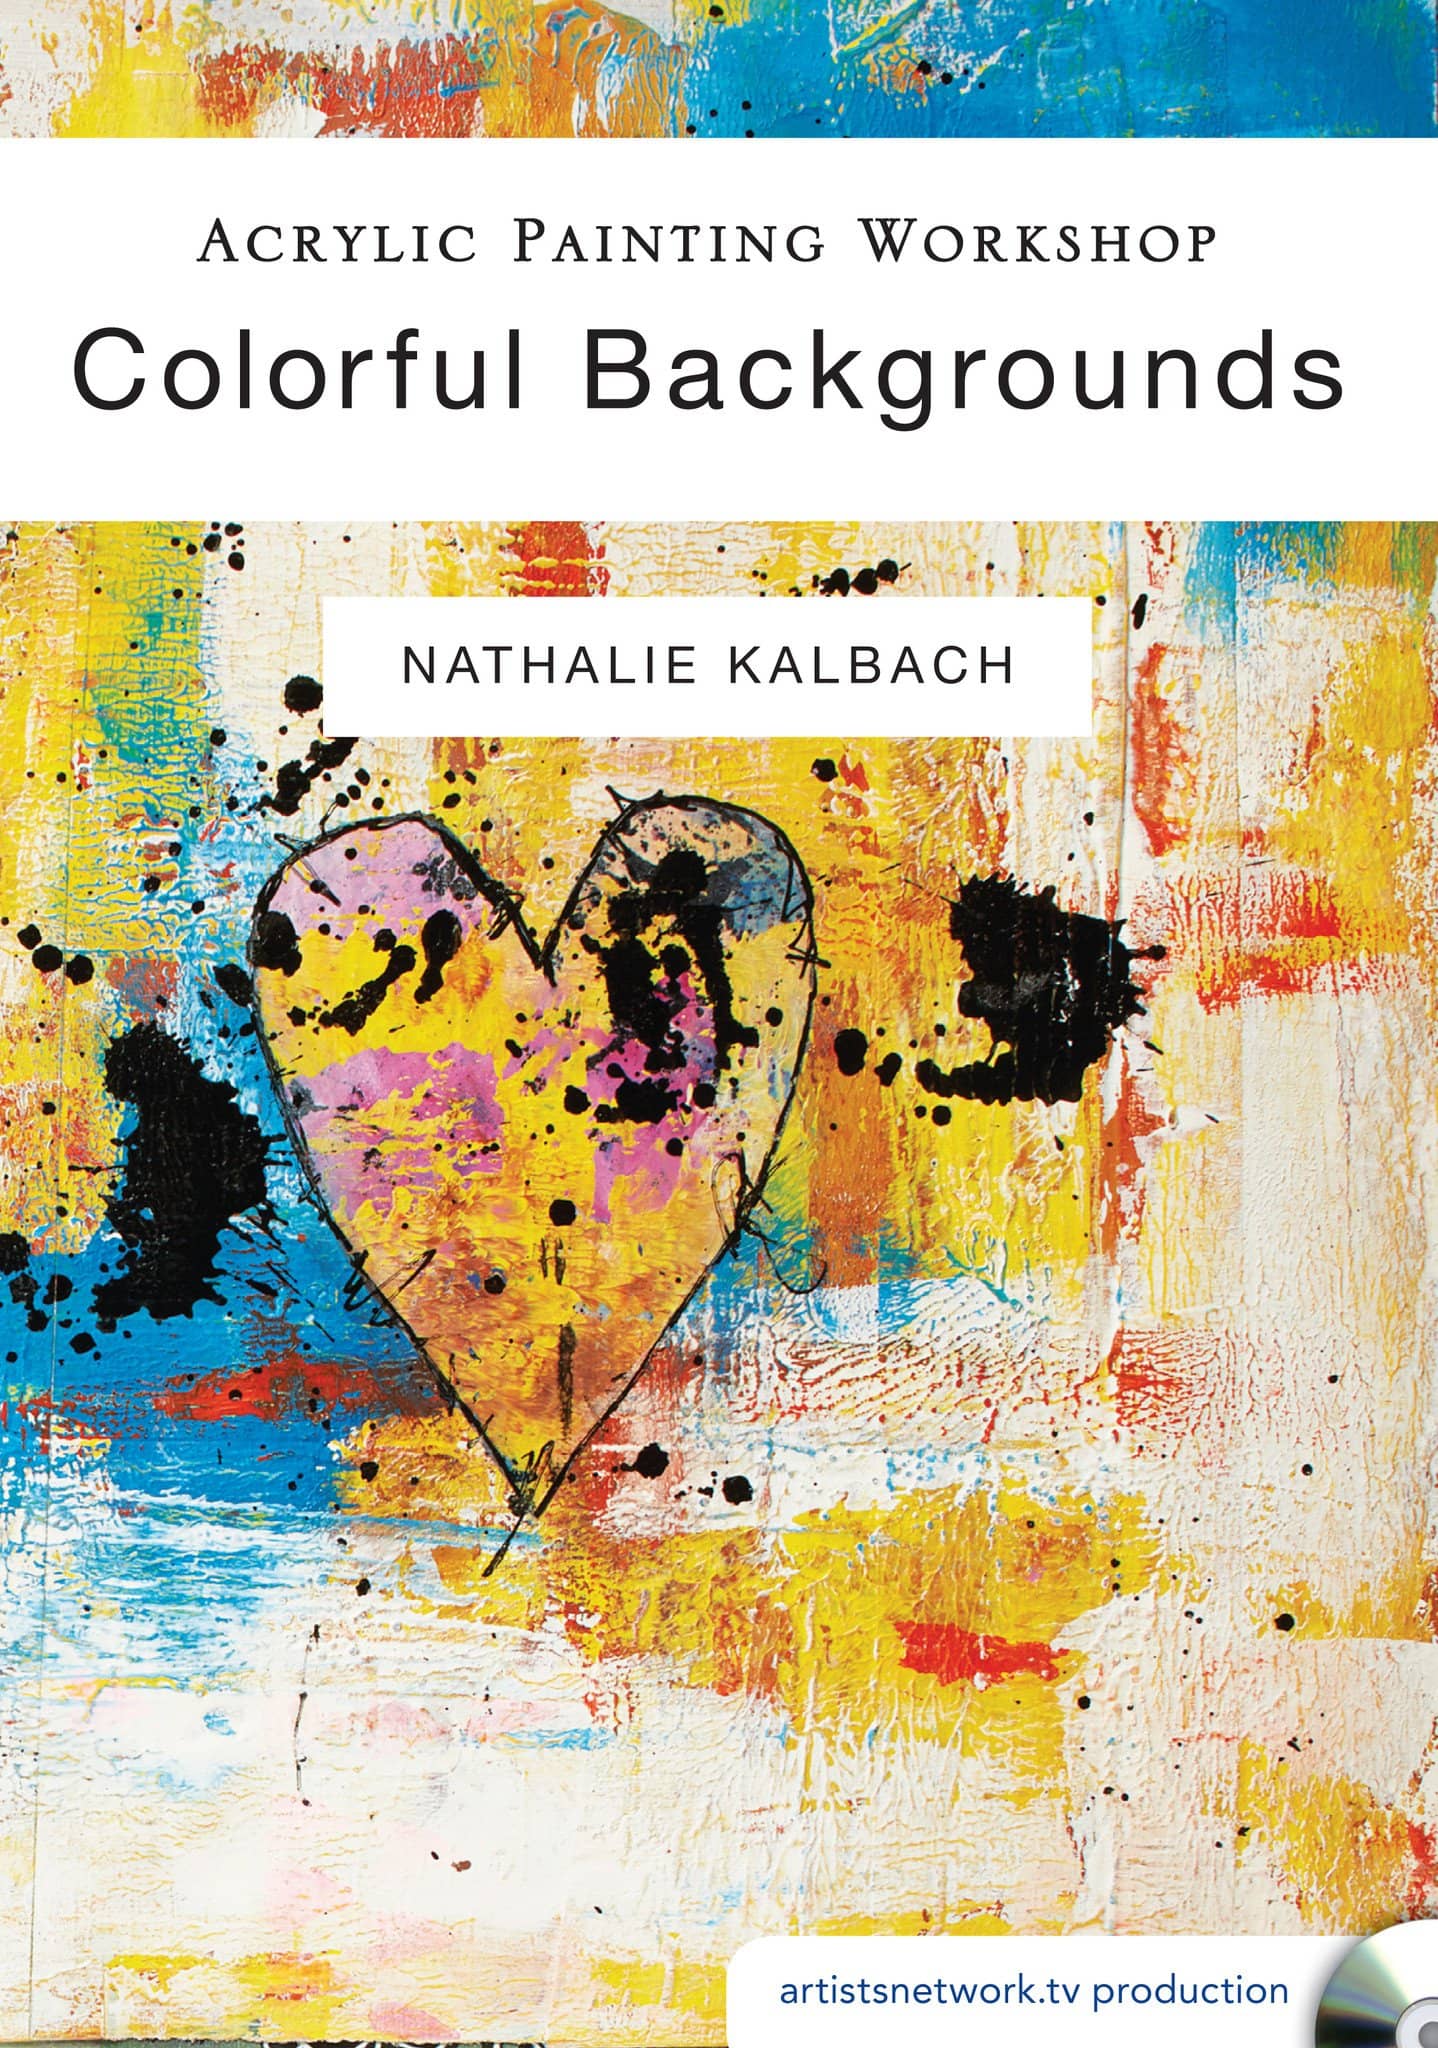 Nathalie Kalbach: Acrylic Painting Workshop - Colorful Backgrounds